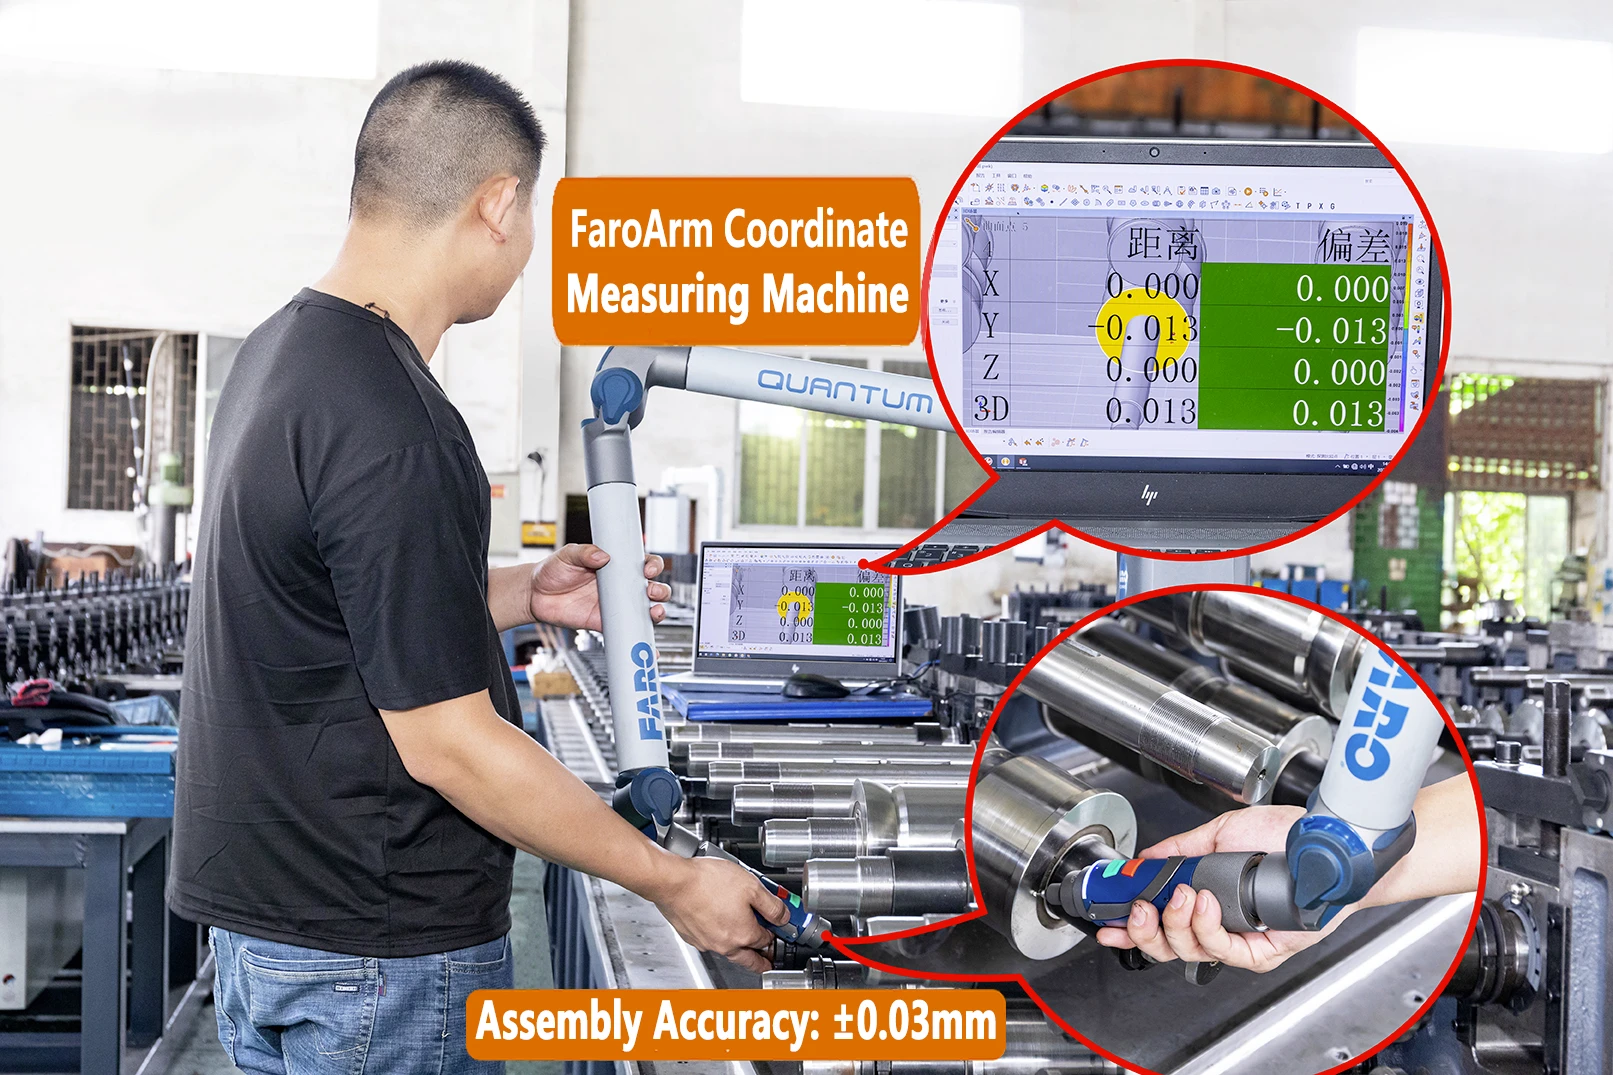 Faro Arm Coordinate Measuring Machine, Assembly Accuracy:±0.03mm